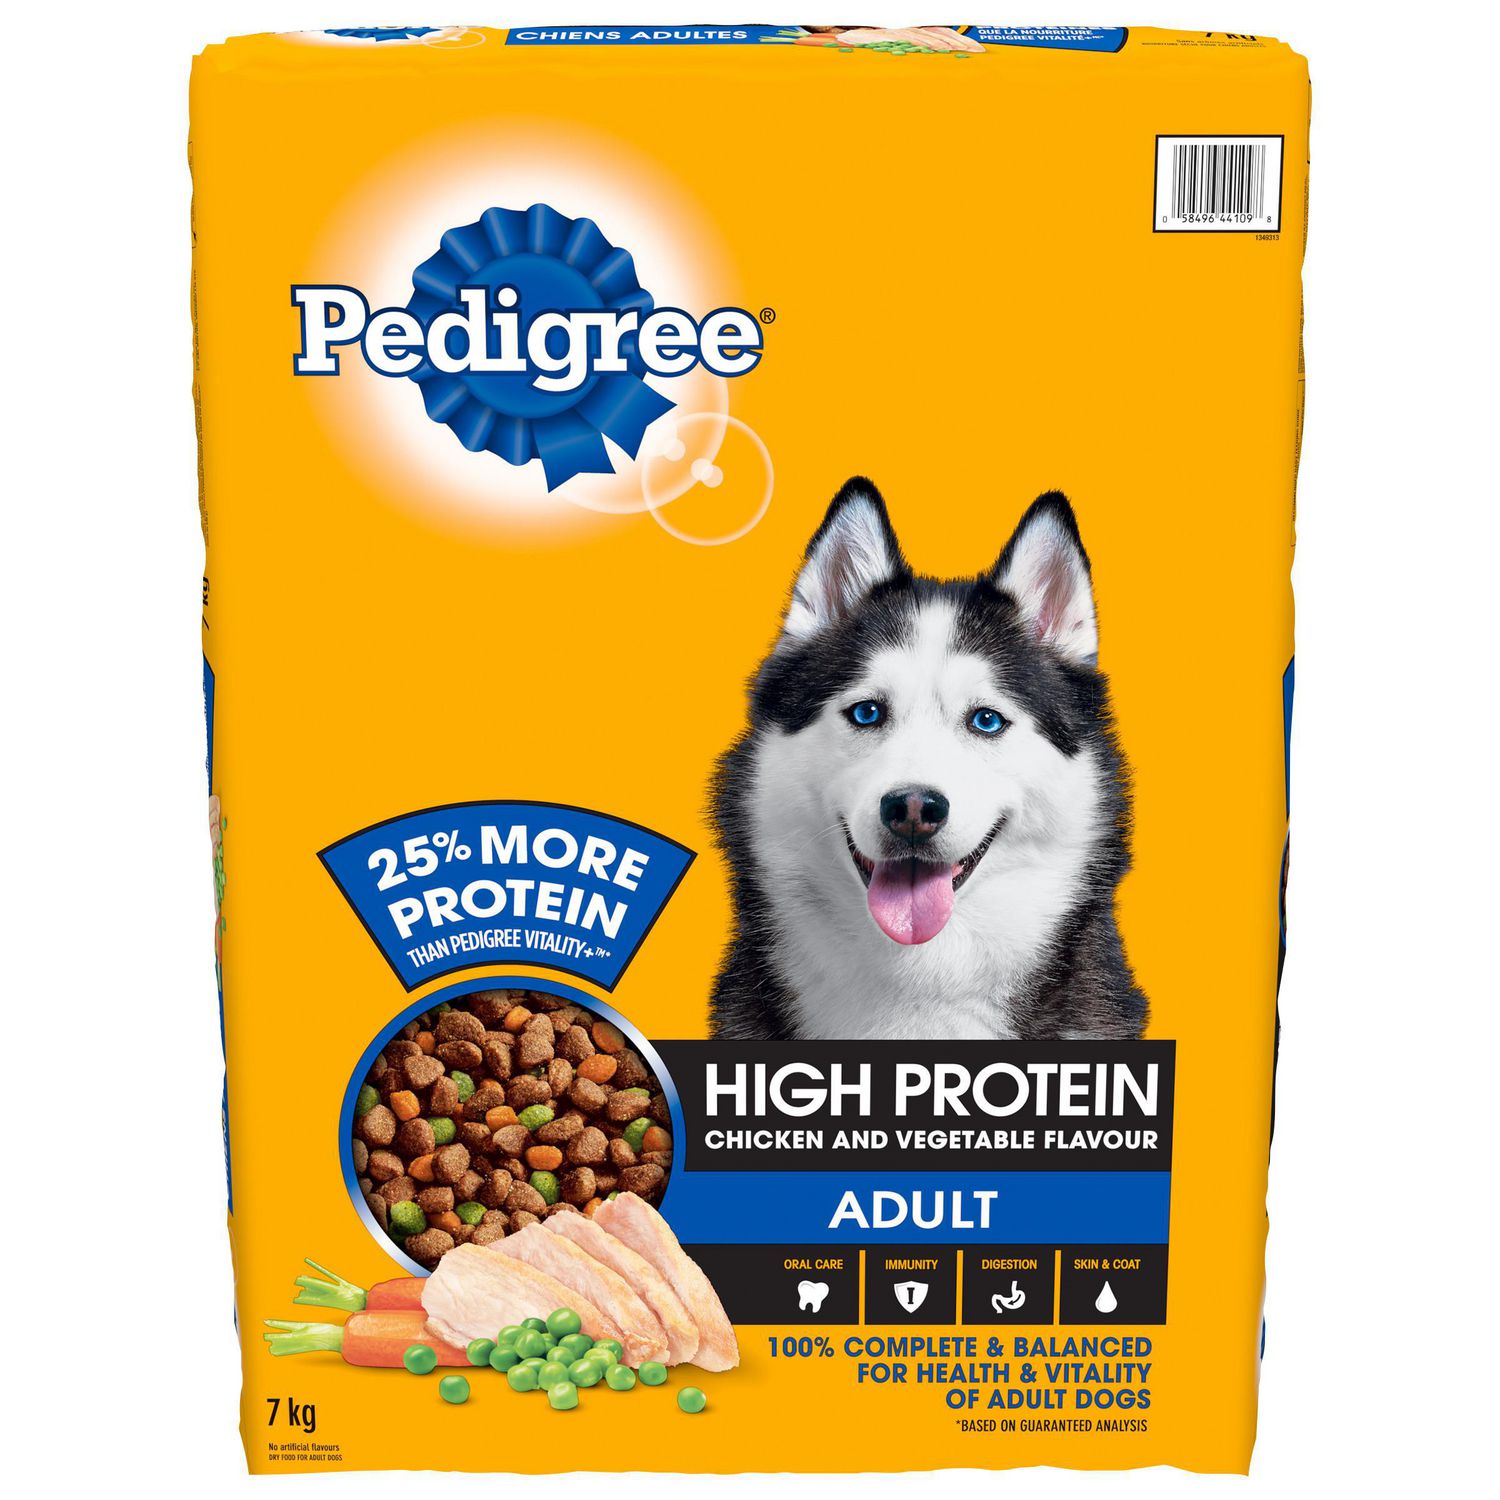 PEDIGREE High Protein Adult Dry Dog Food, Chicken and Vegetable Flavour